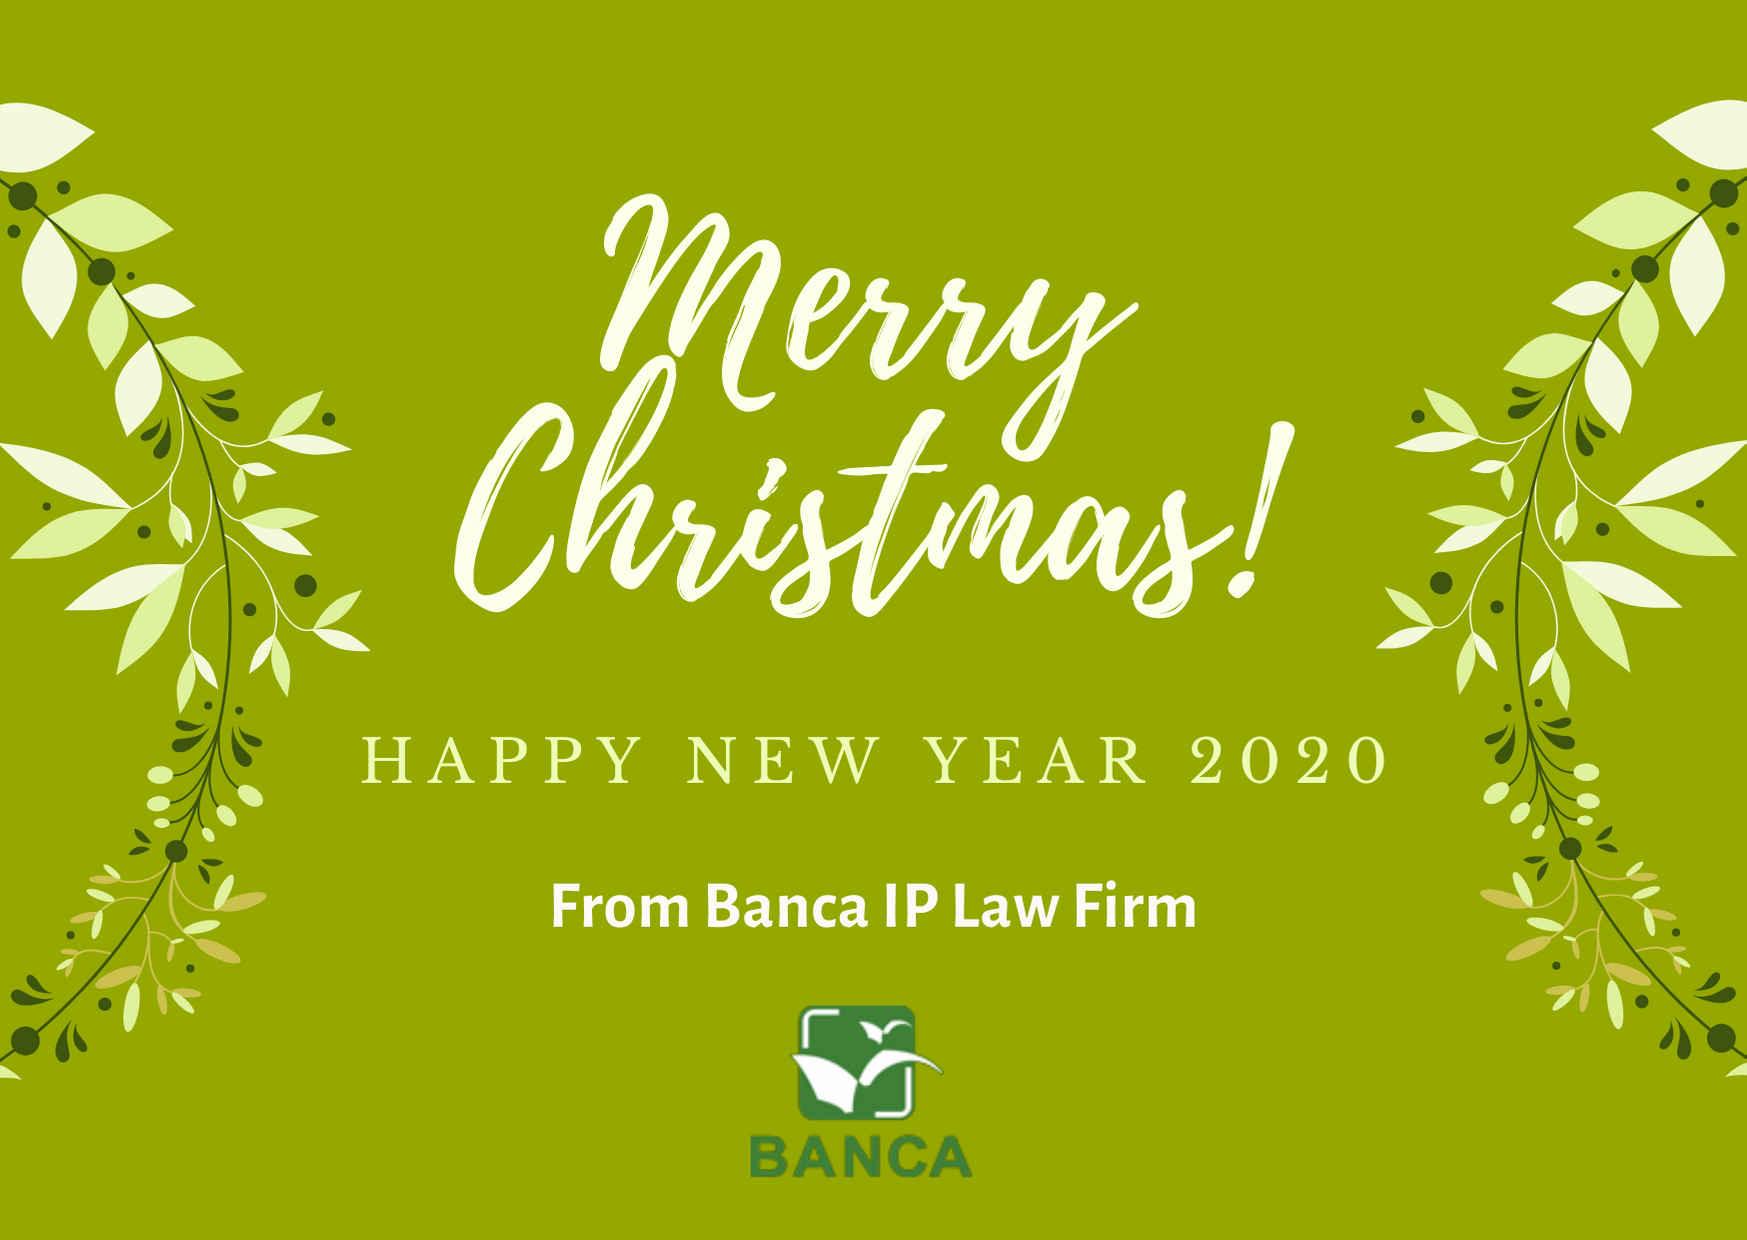 Season's Greetings from BANCA IP LAW FIRM